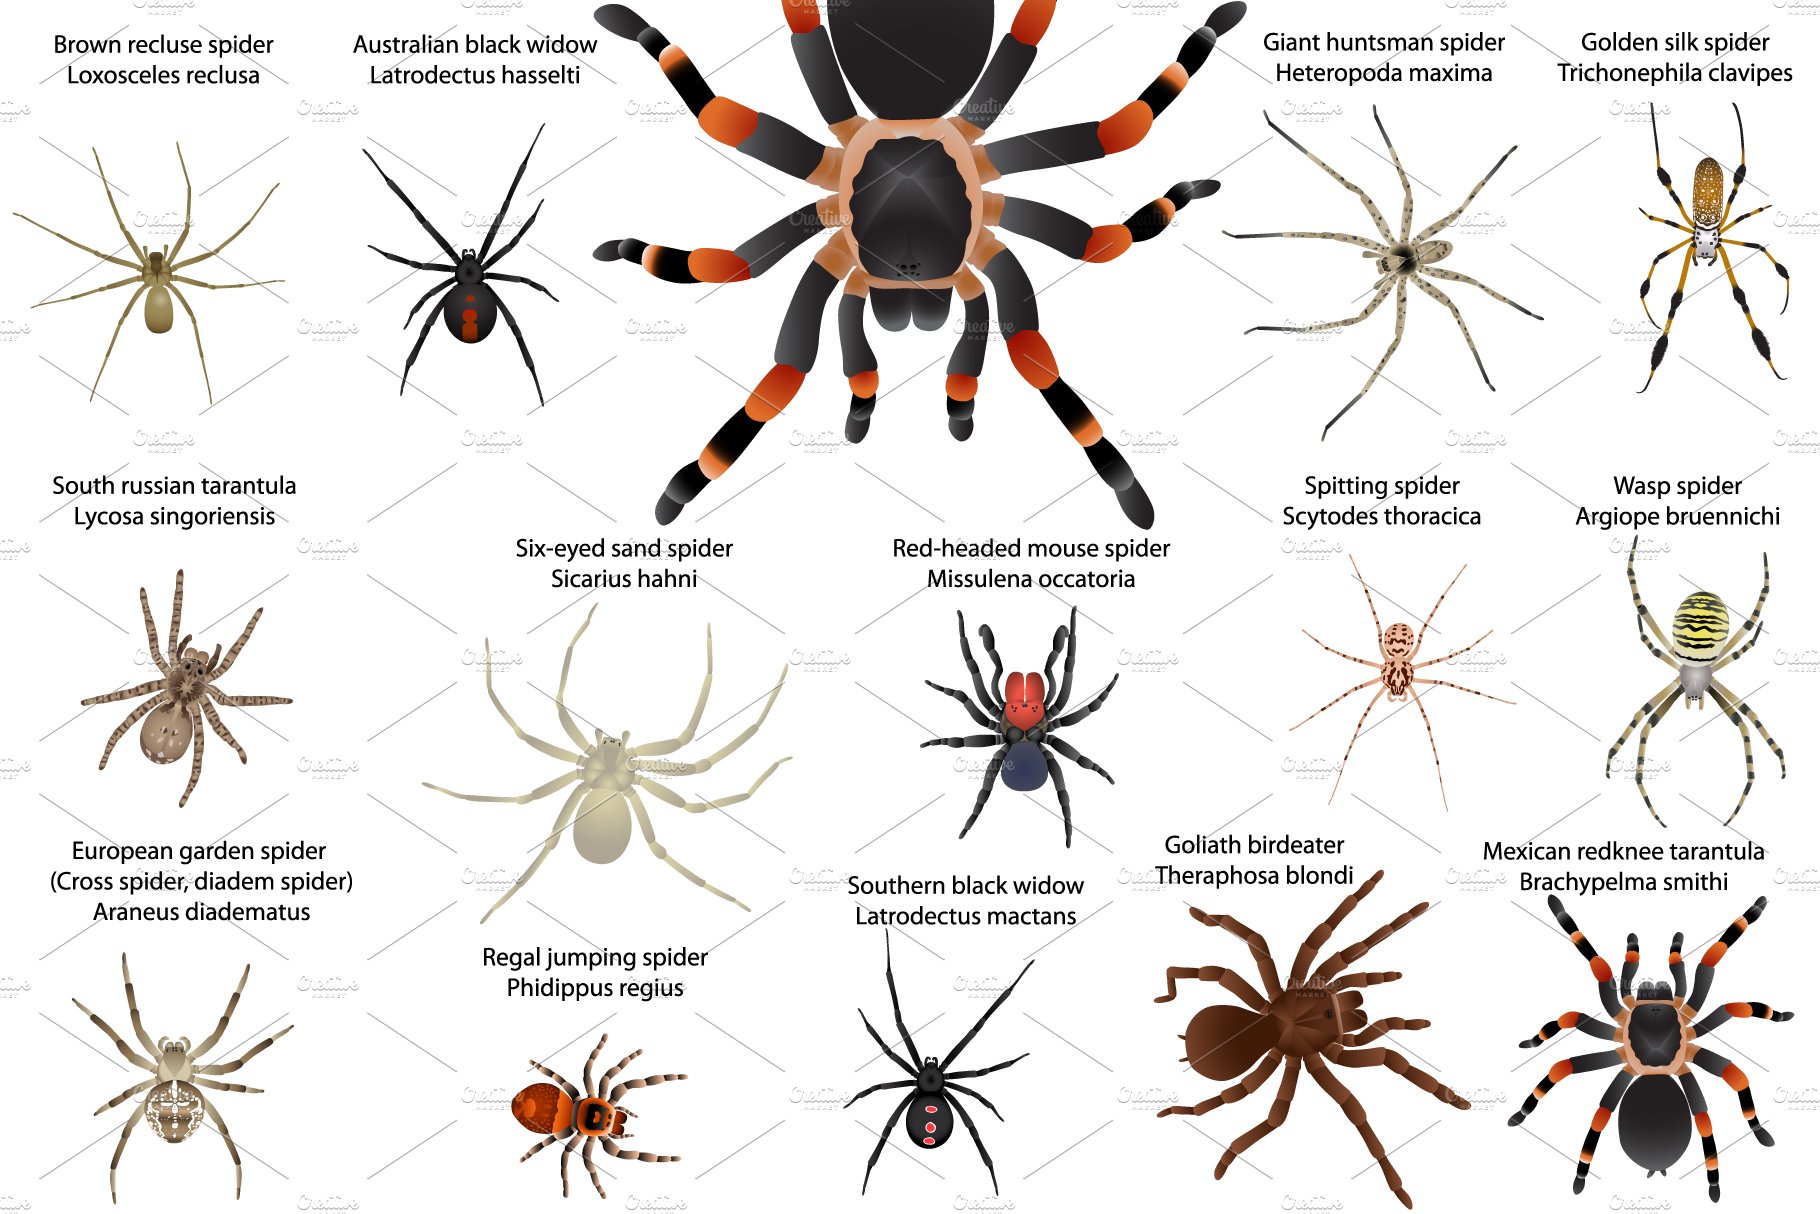 Diverse of the poisonous spiders.